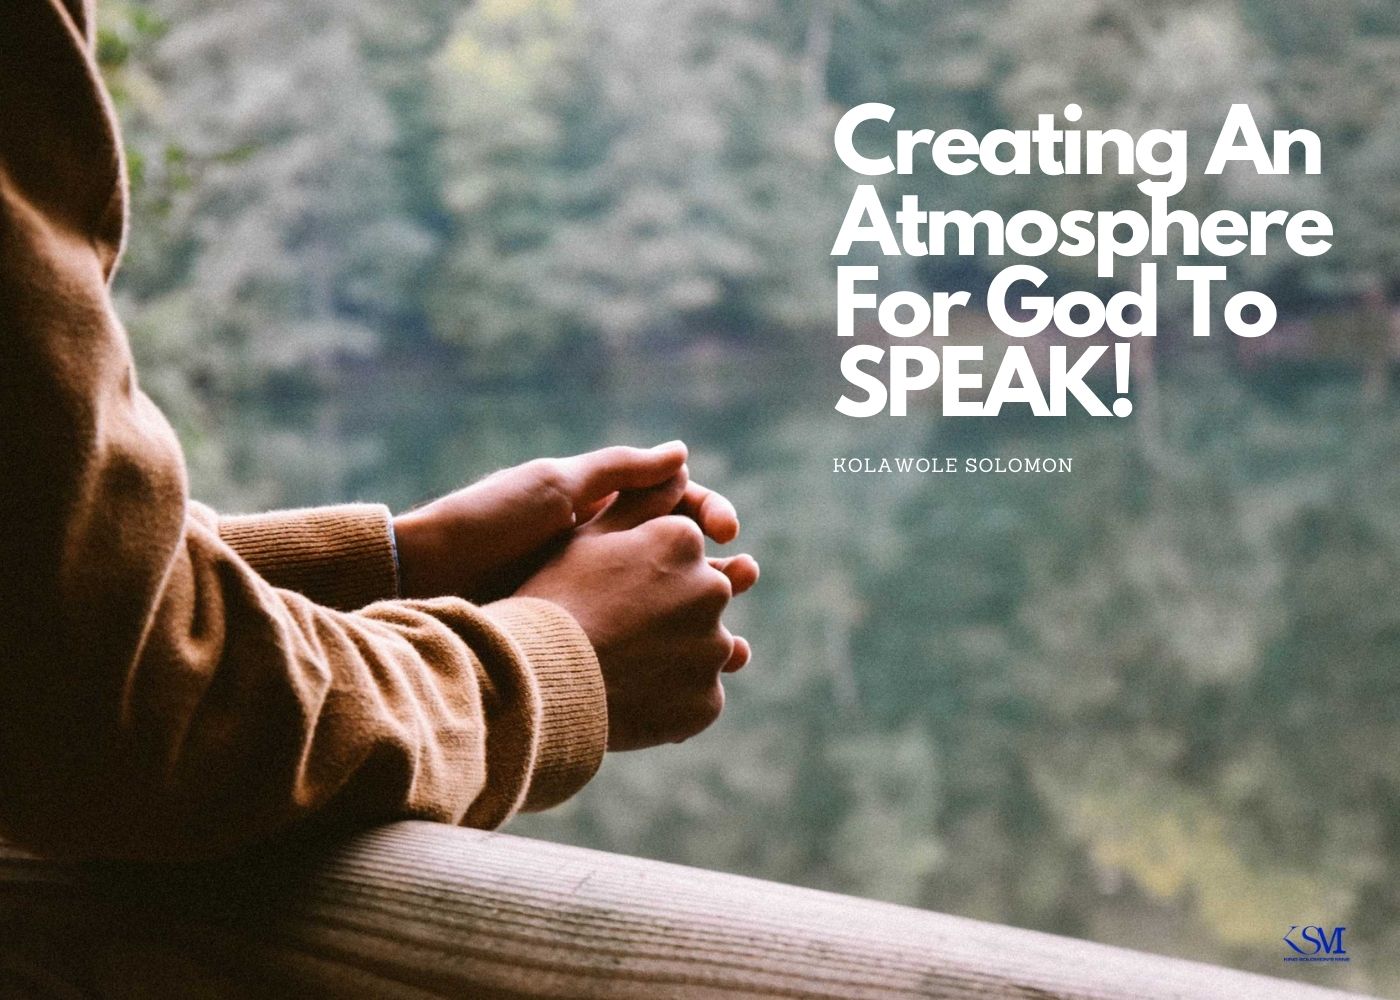 Creating An Atmosphere For God To Speak!